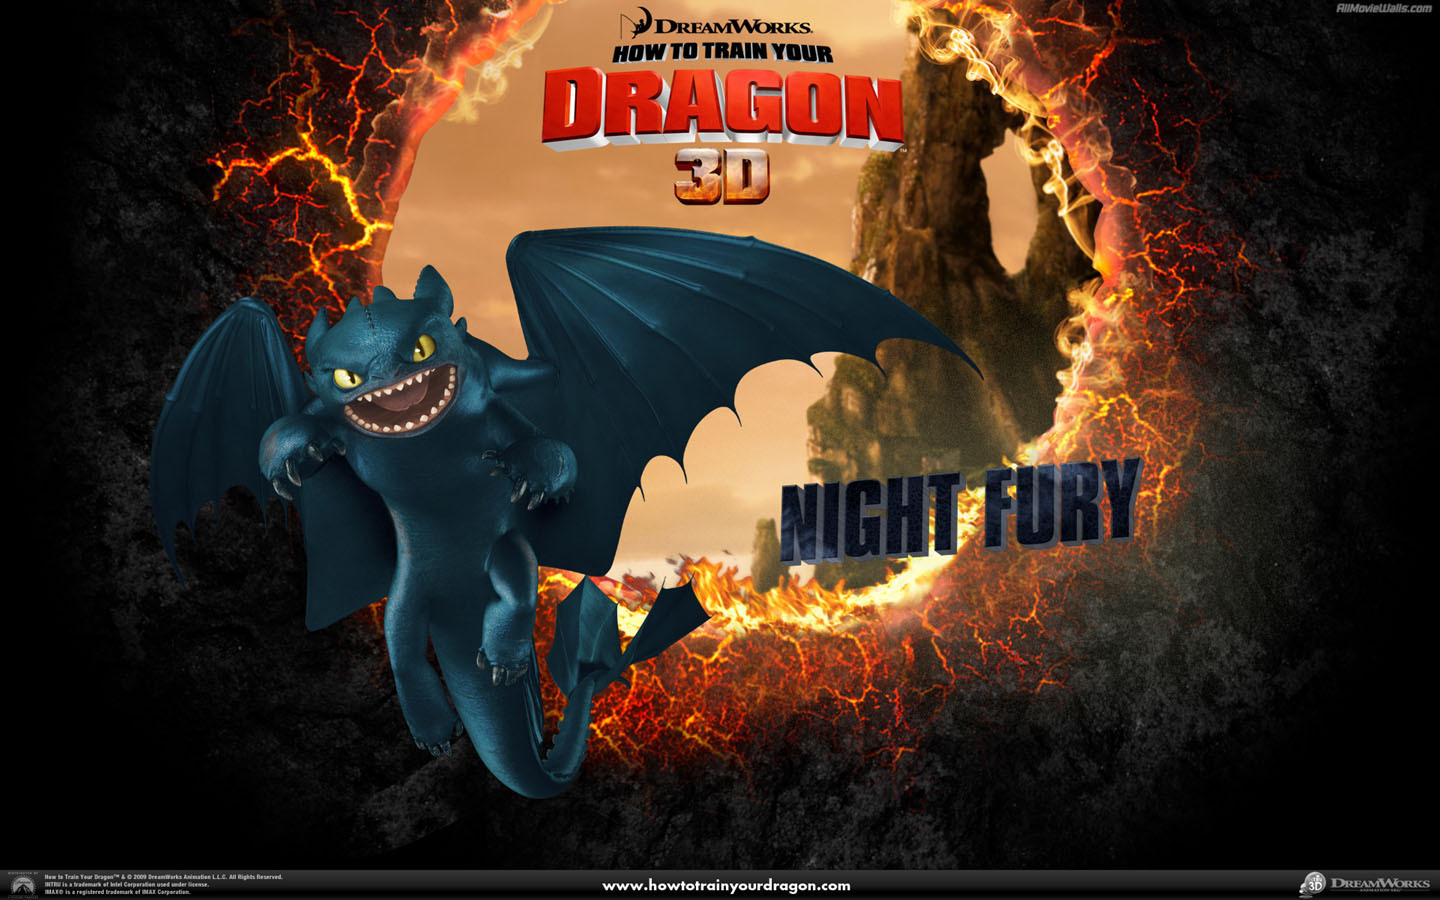 How to Train Your Dragon - Movies Wallpaper (10738425) - Fanpop